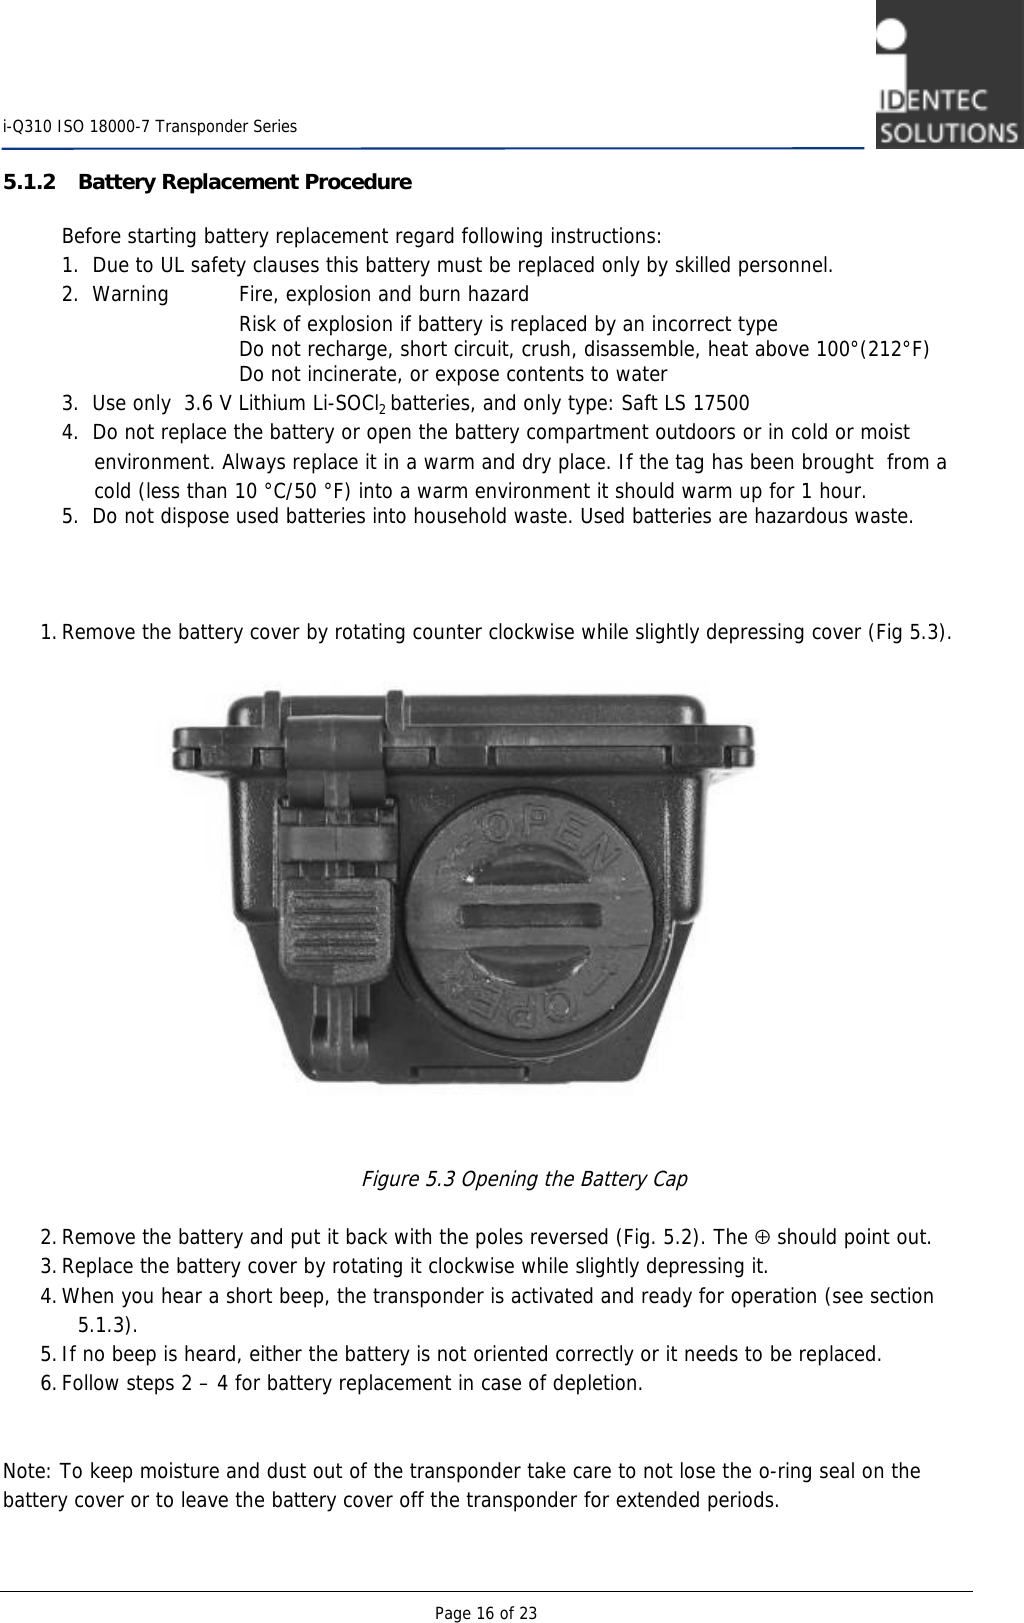    i-Q310 ISO 18000-7 Transponder Series  Page 16 of 23 5.1.2 Battery Replacement Procedure   Before starting battery replacement regard following instructions:   1.  Due to UL safety clauses this battery must be replaced only by skilled personnel.   2.  Warning     Fire, explosion and burn hazard          Risk of explosion if battery is replaced by an incorrect type     Do not recharge, short circuit, crush, disassemble, heat above 100°(212°F)          Do not incinerate, or expose contents to water  3.  Use only  3.6 V Lithium Li-SOCl2 batteries, and only type: Saft LS 17500    4.  Do not replace the battery or open the battery compartment outdoors or in cold or moist                    environment. Always replace it in a warm and dry place. If the tag has been brought  from a         cold (less than 10 °C/50 °F) into a warm environment it should warm up for 1 hour.   5.  Do not dispose used batteries into household waste. Used batteries are hazardous waste.        1. Remove the battery cover by rotating counter clockwise while slightly depressing cover (Fig 5.3).                    Figure 5.3 Opening the Battery Cap  2. Remove the battery and put it back with the poles reversed (Fig. 5.2). The ⊕ should point out.  3. Replace the battery cover by rotating it clockwise while slightly depressing it. 4. When you hear a short beep, the transponder is activated and ready for operation (see section 5.1.3).  5. If no beep is heard, either the battery is not oriented correctly or it needs to be replaced.  6. Follow steps 2 – 4 for battery replacement in case of depletion.    Note: To keep moisture and dust out of the transponder take care to not lose the o-ring seal on the battery cover or to leave the battery cover off the transponder for extended periods.  